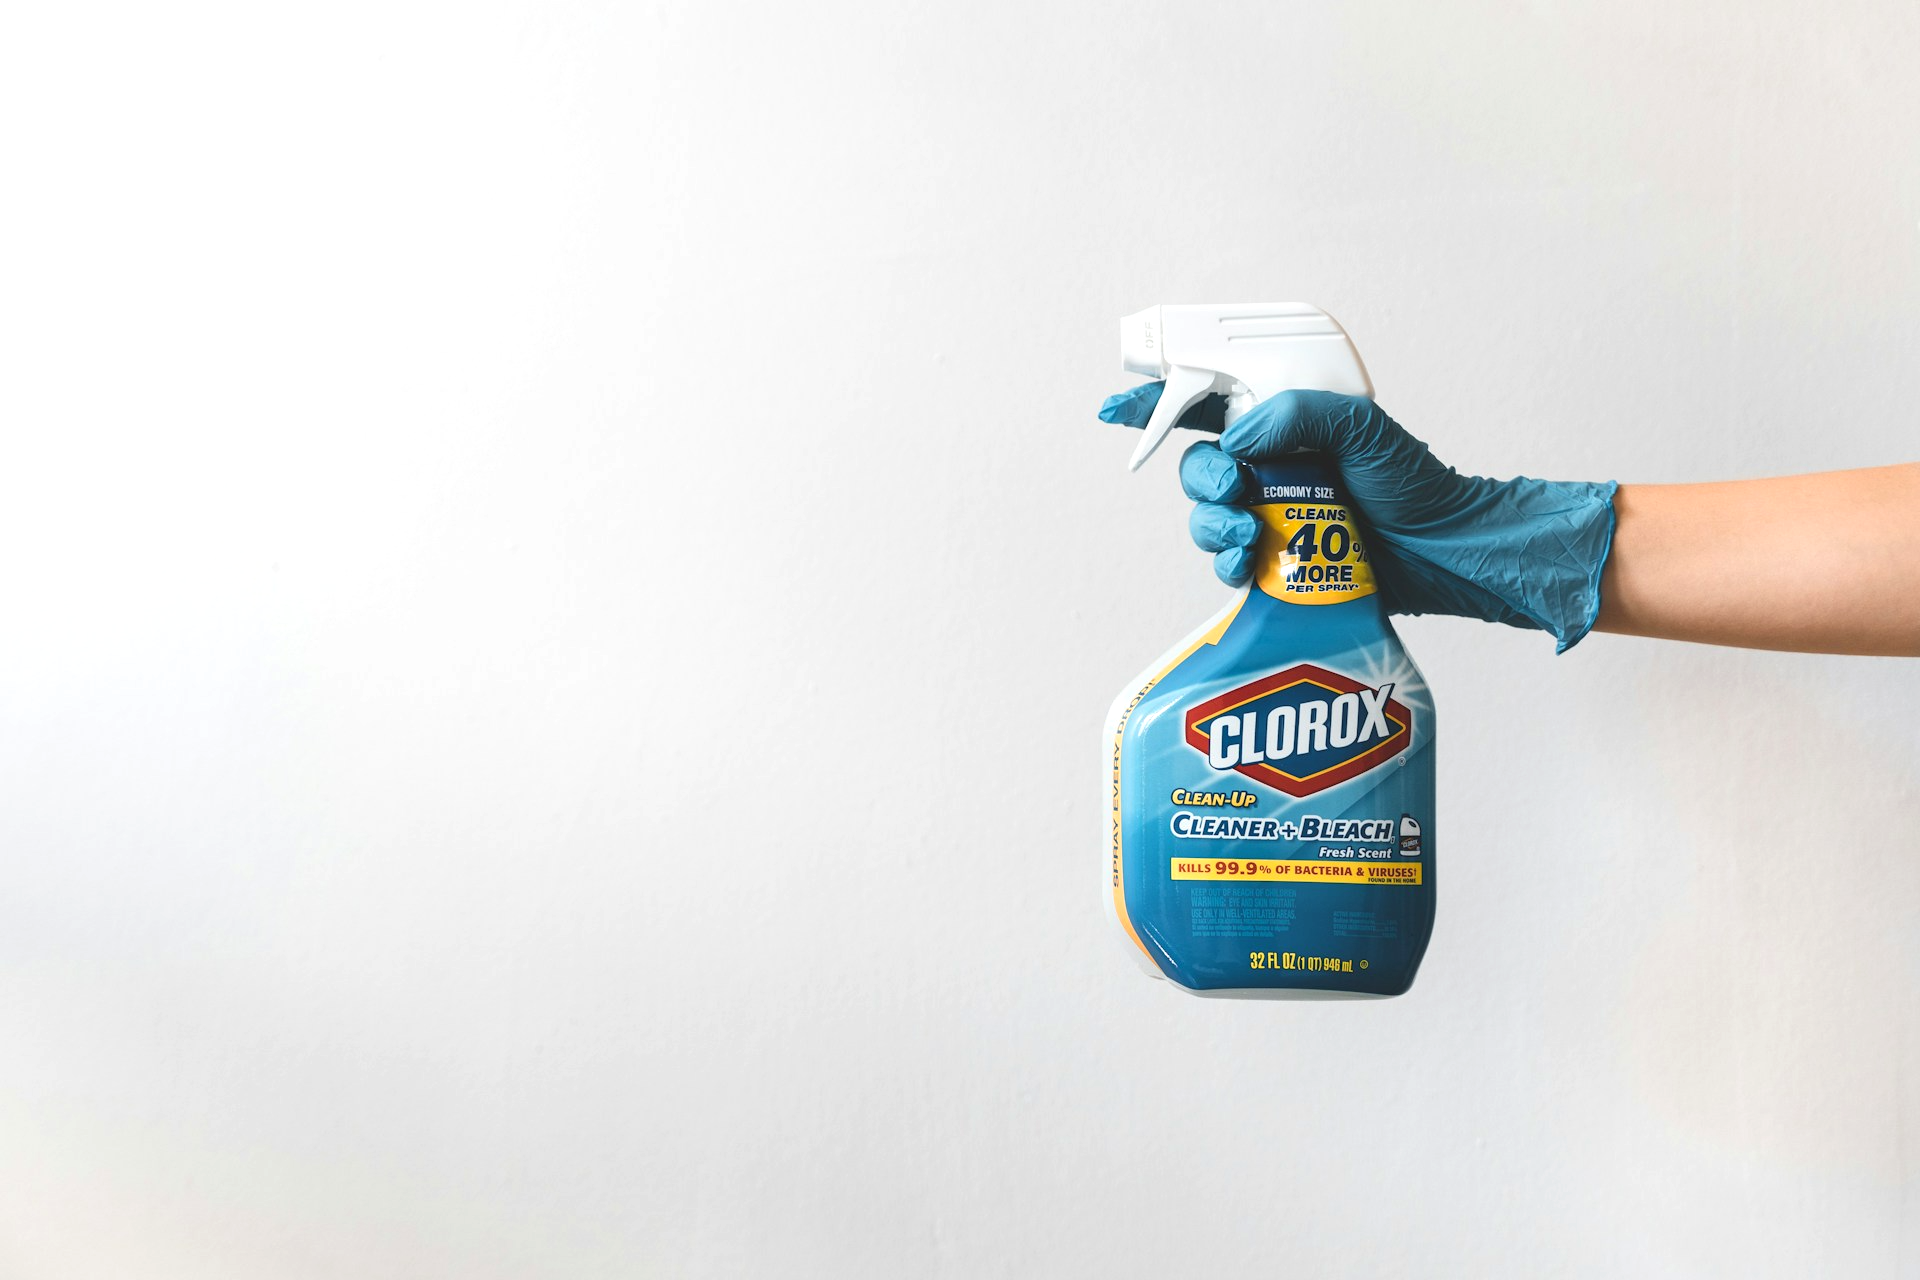 Gloved hand holding a bottle of Clorox Cleaner plus Bleach